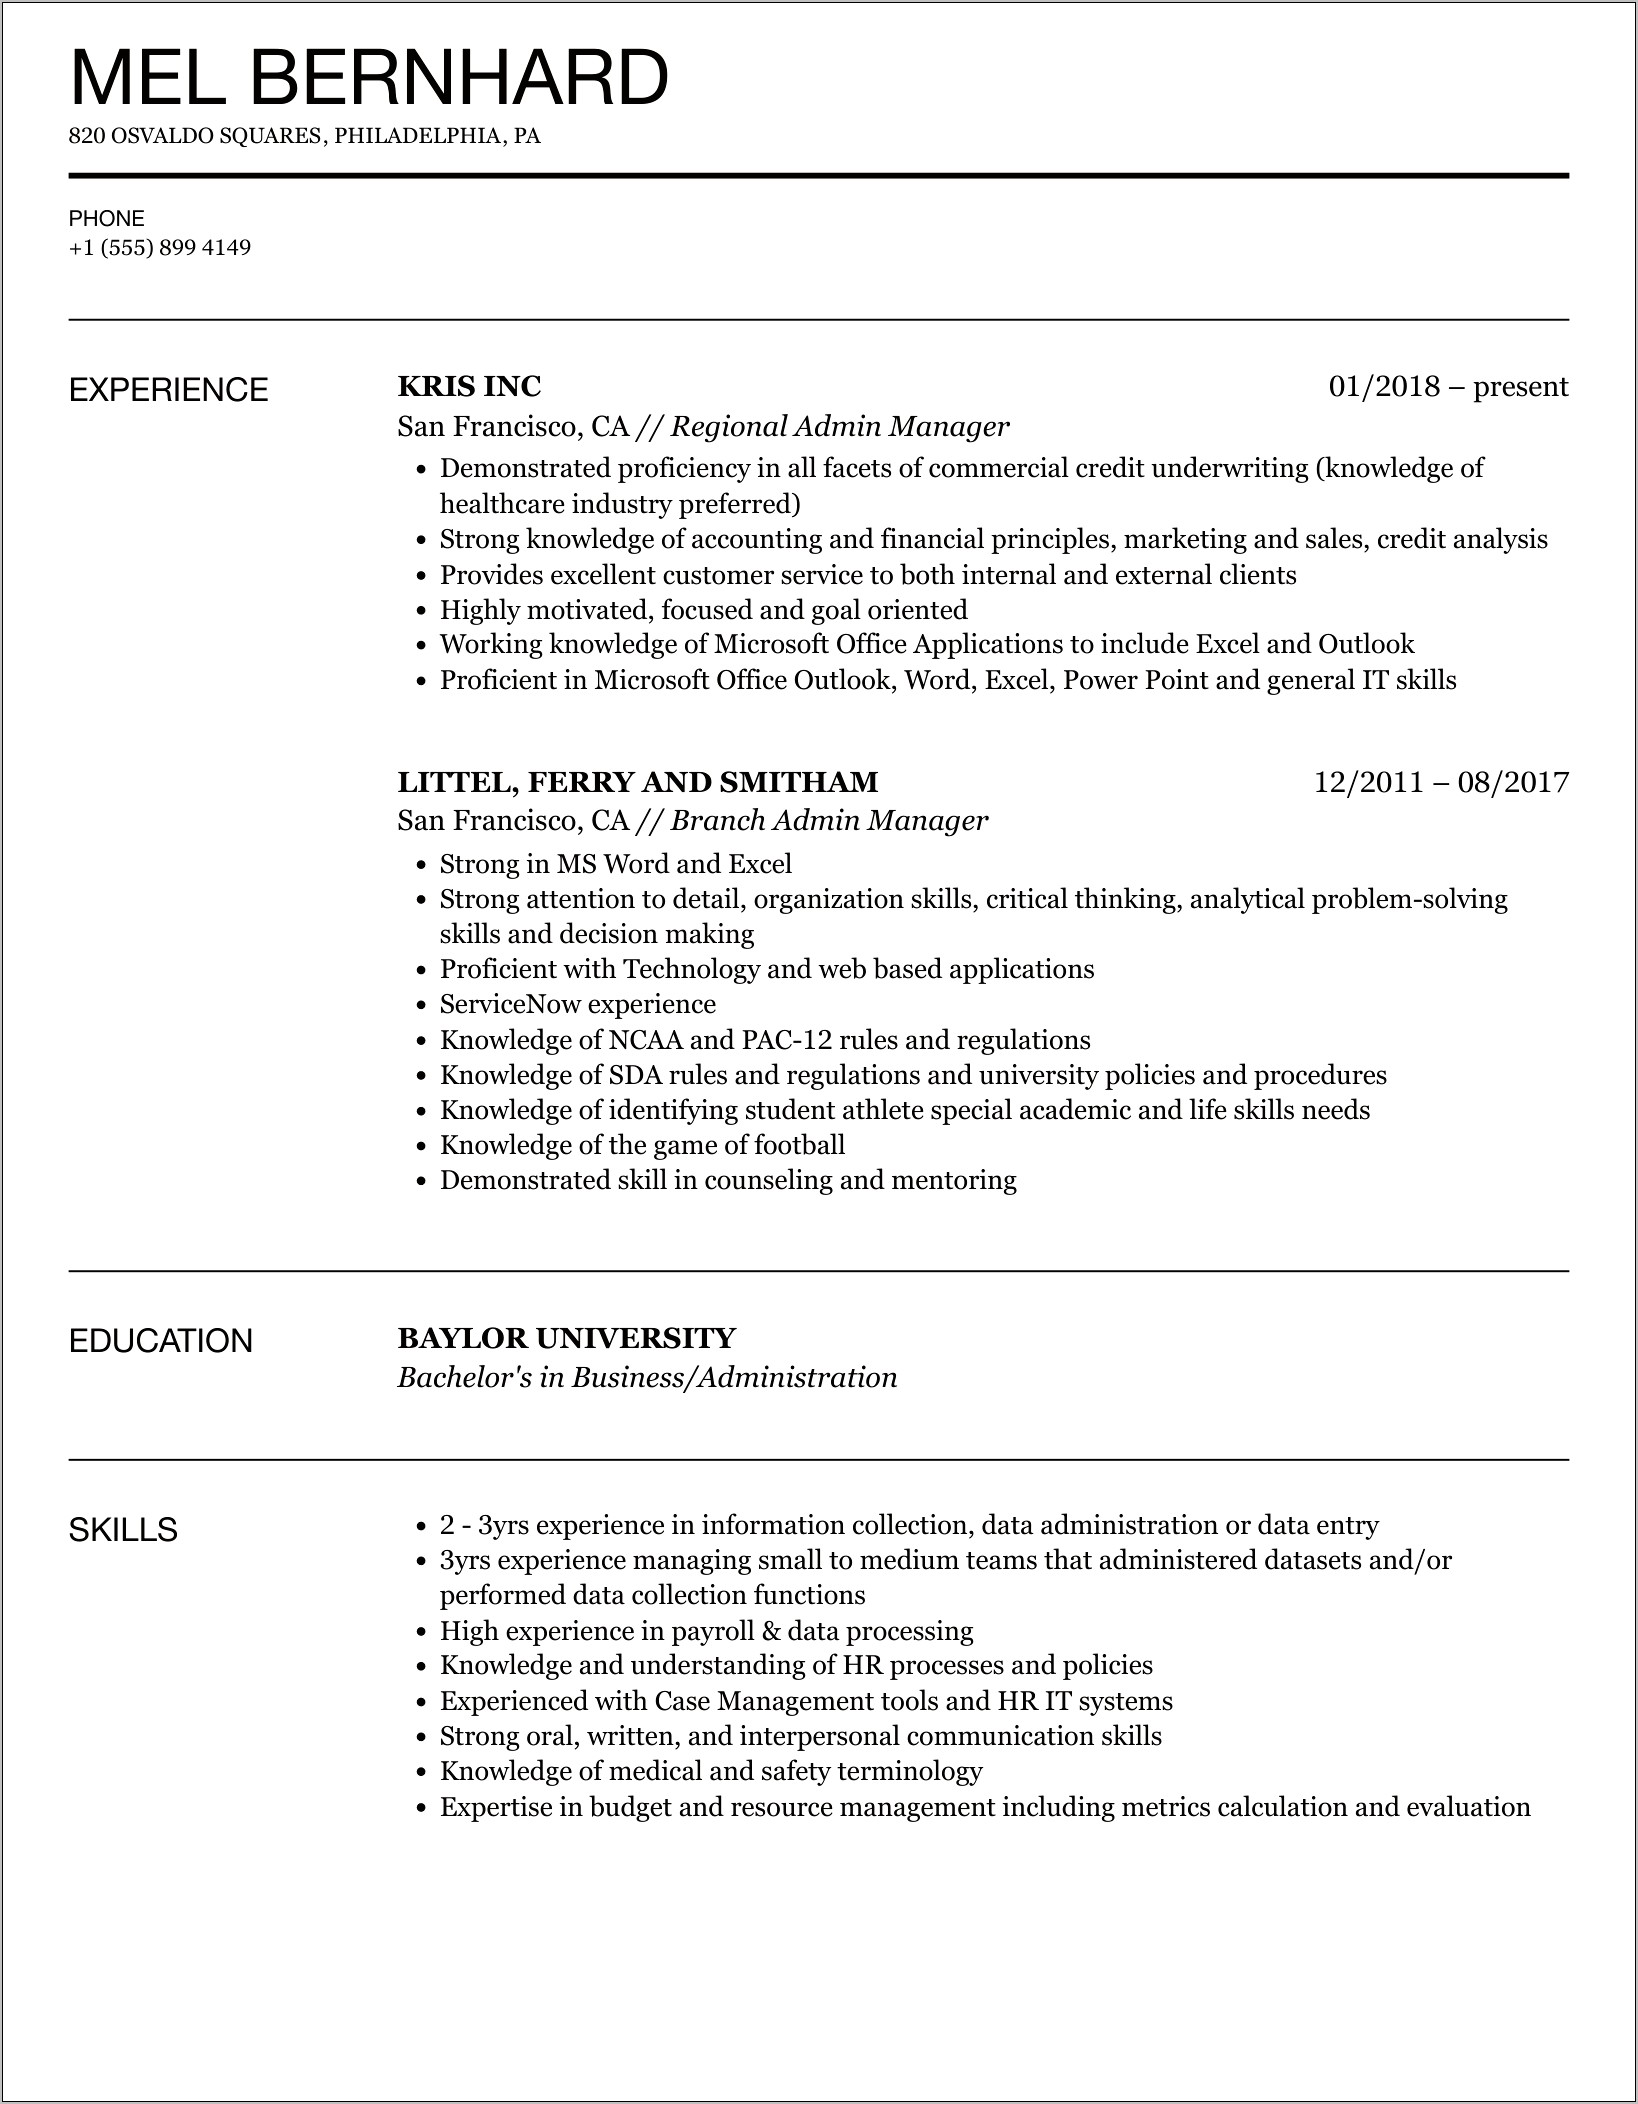 Admin Manager Resume Format India